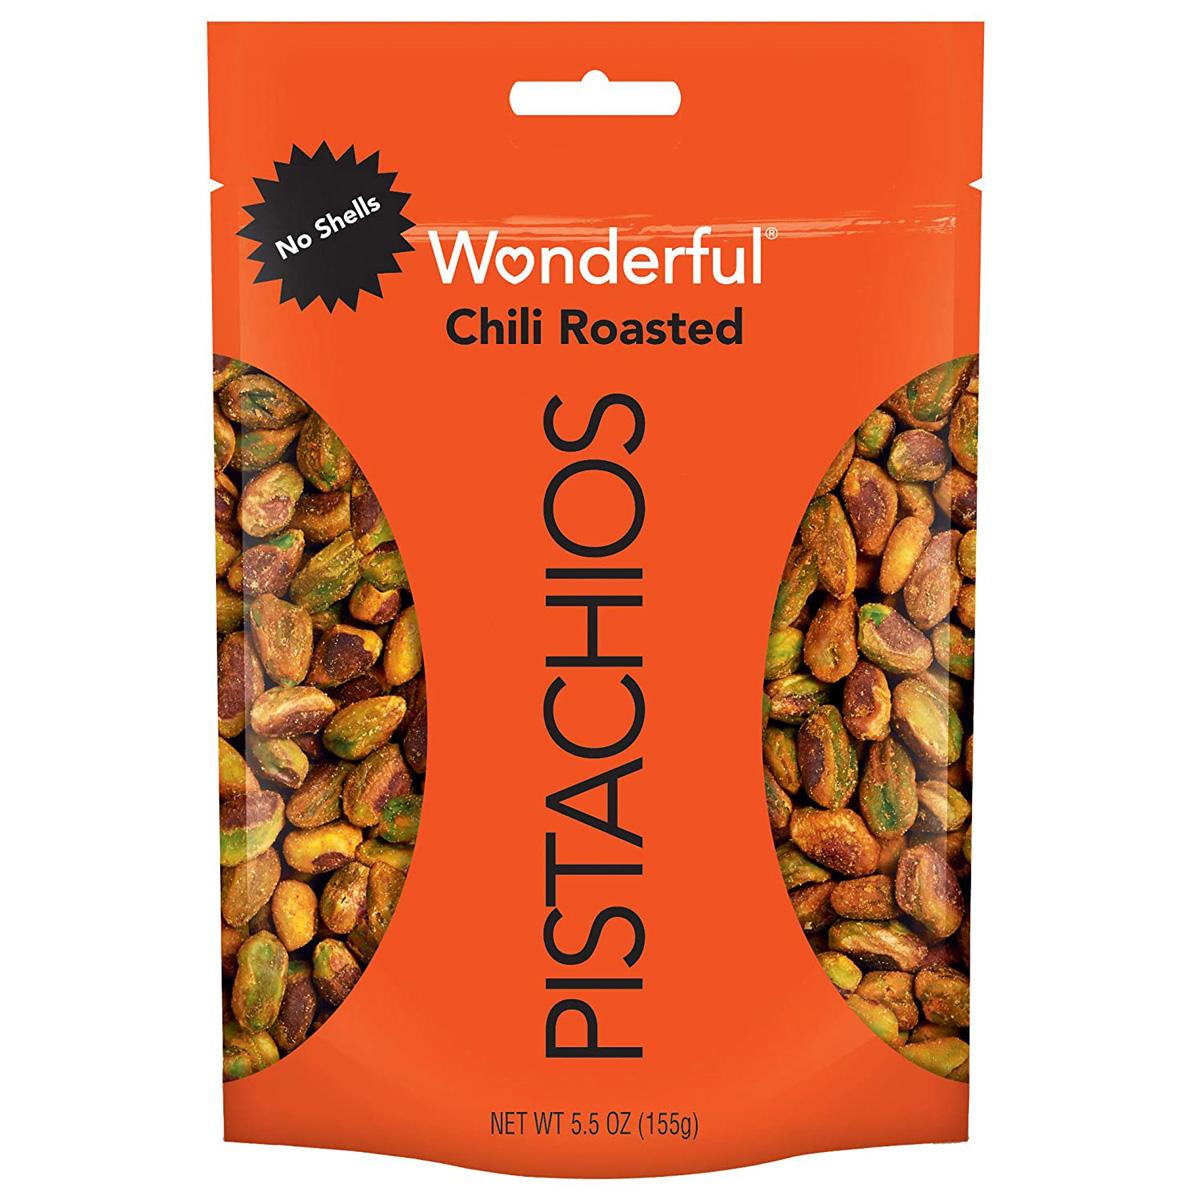 Wonderful Pistachios Chili Roasted No Shell Bag for $4.12 Shipped